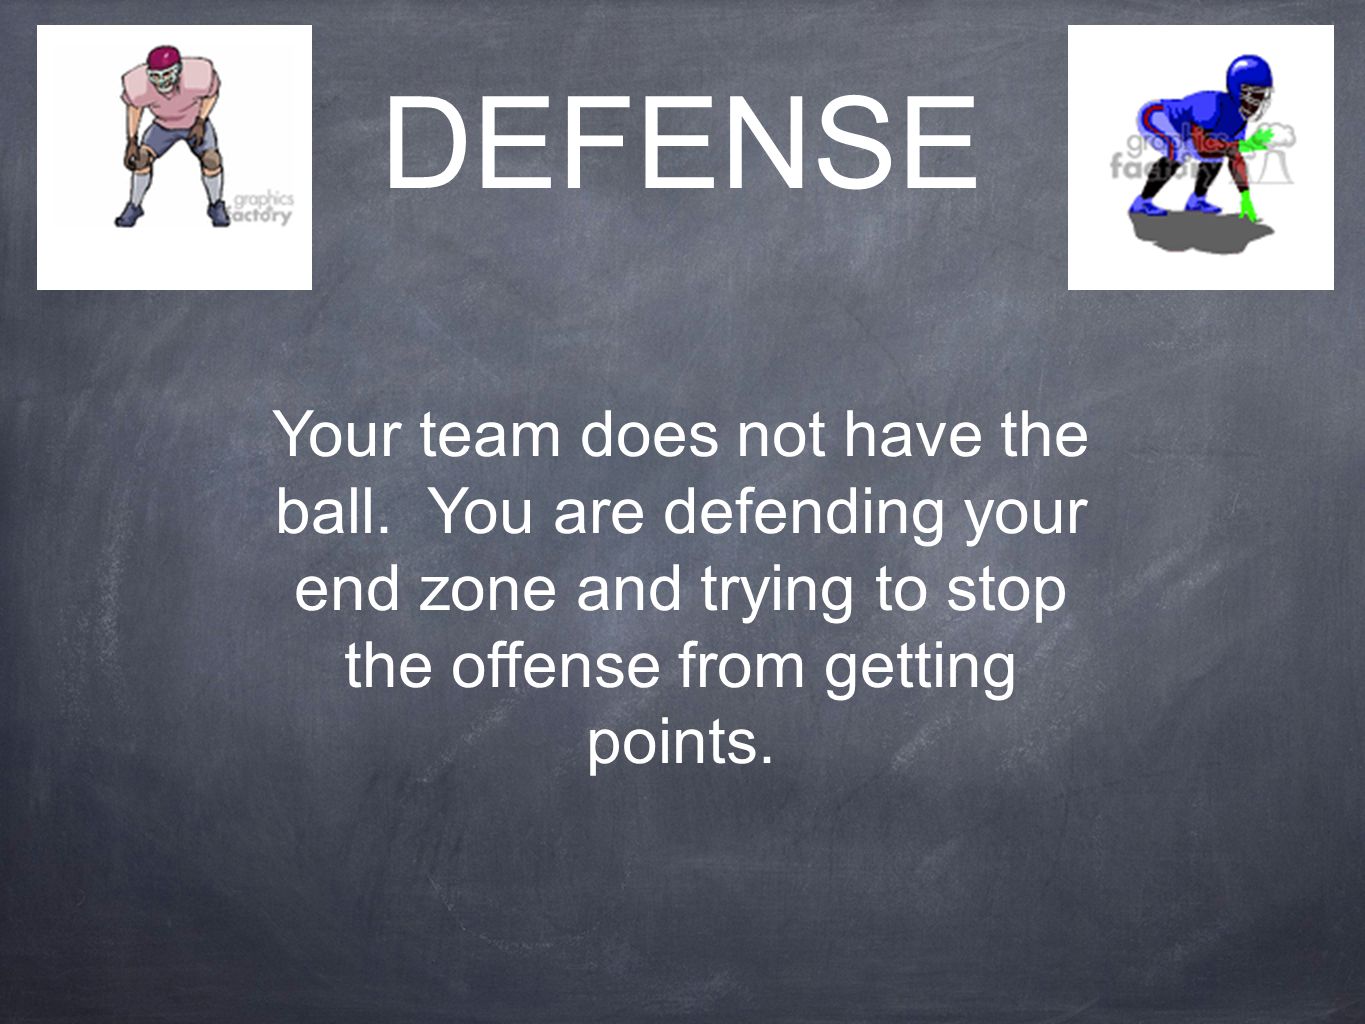 DEFENSE Your team does not have the ball.